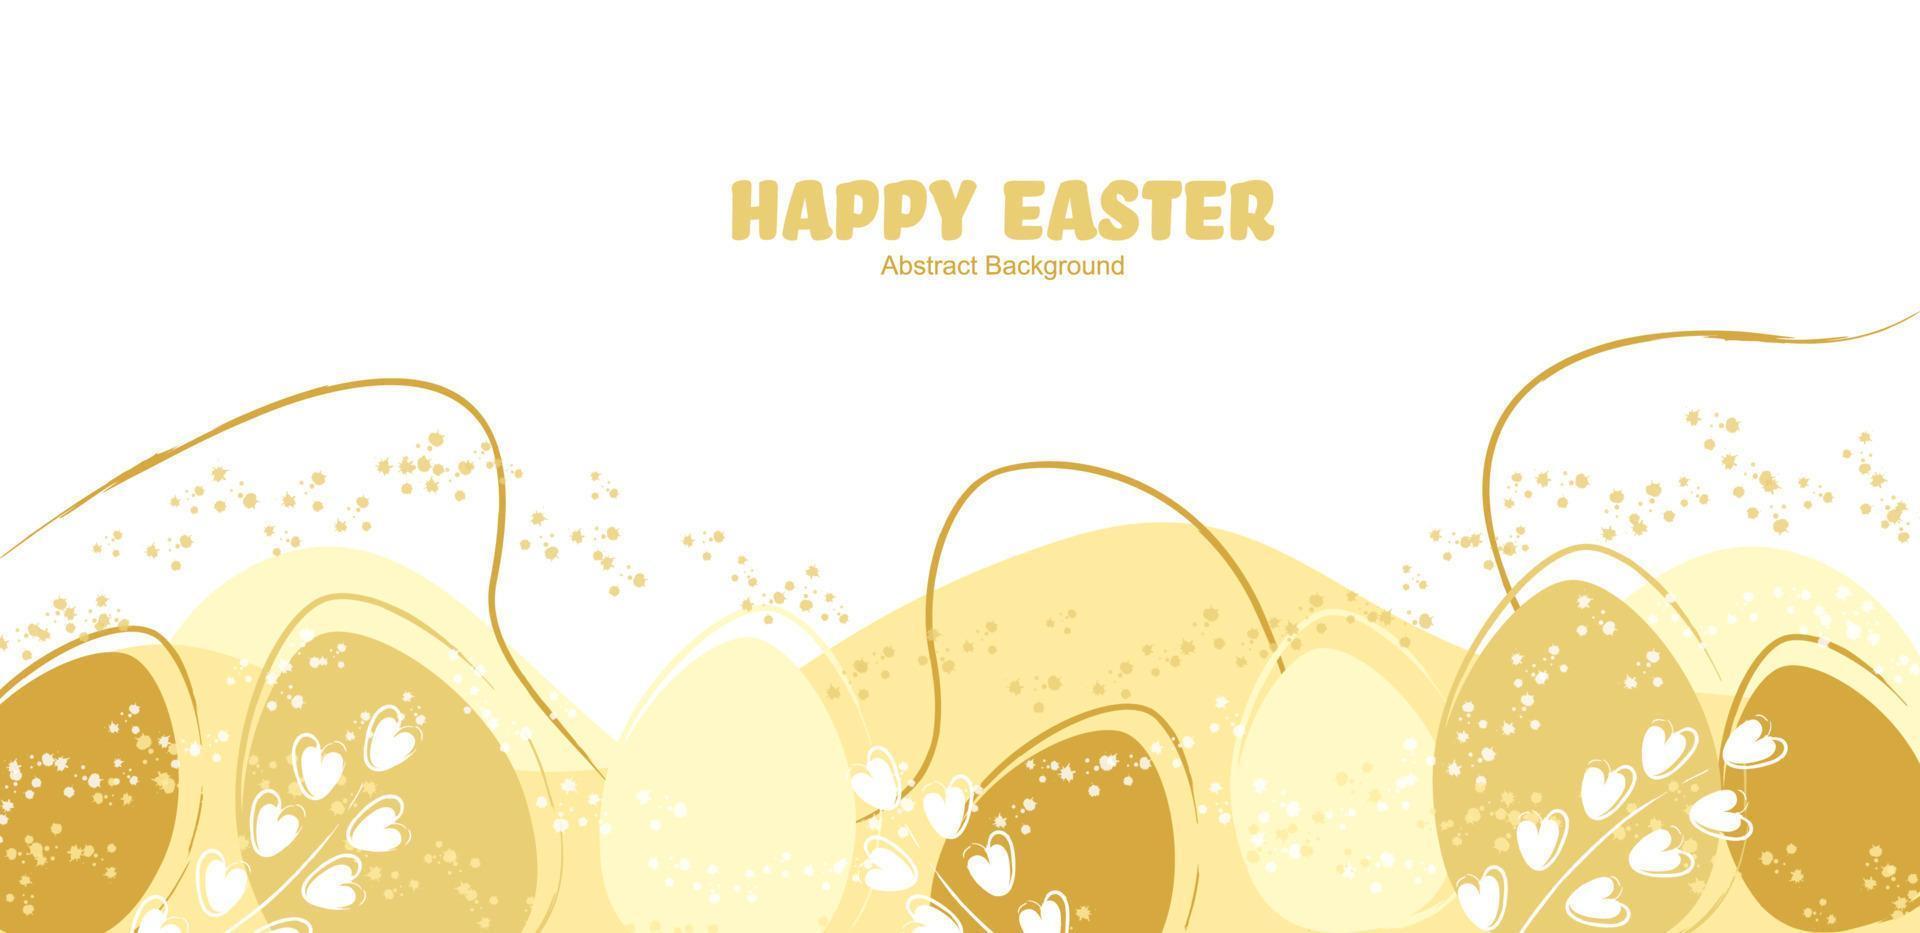 Decorative Easter Banner With Easter Eggs and Leaves in Yellow Colors vector